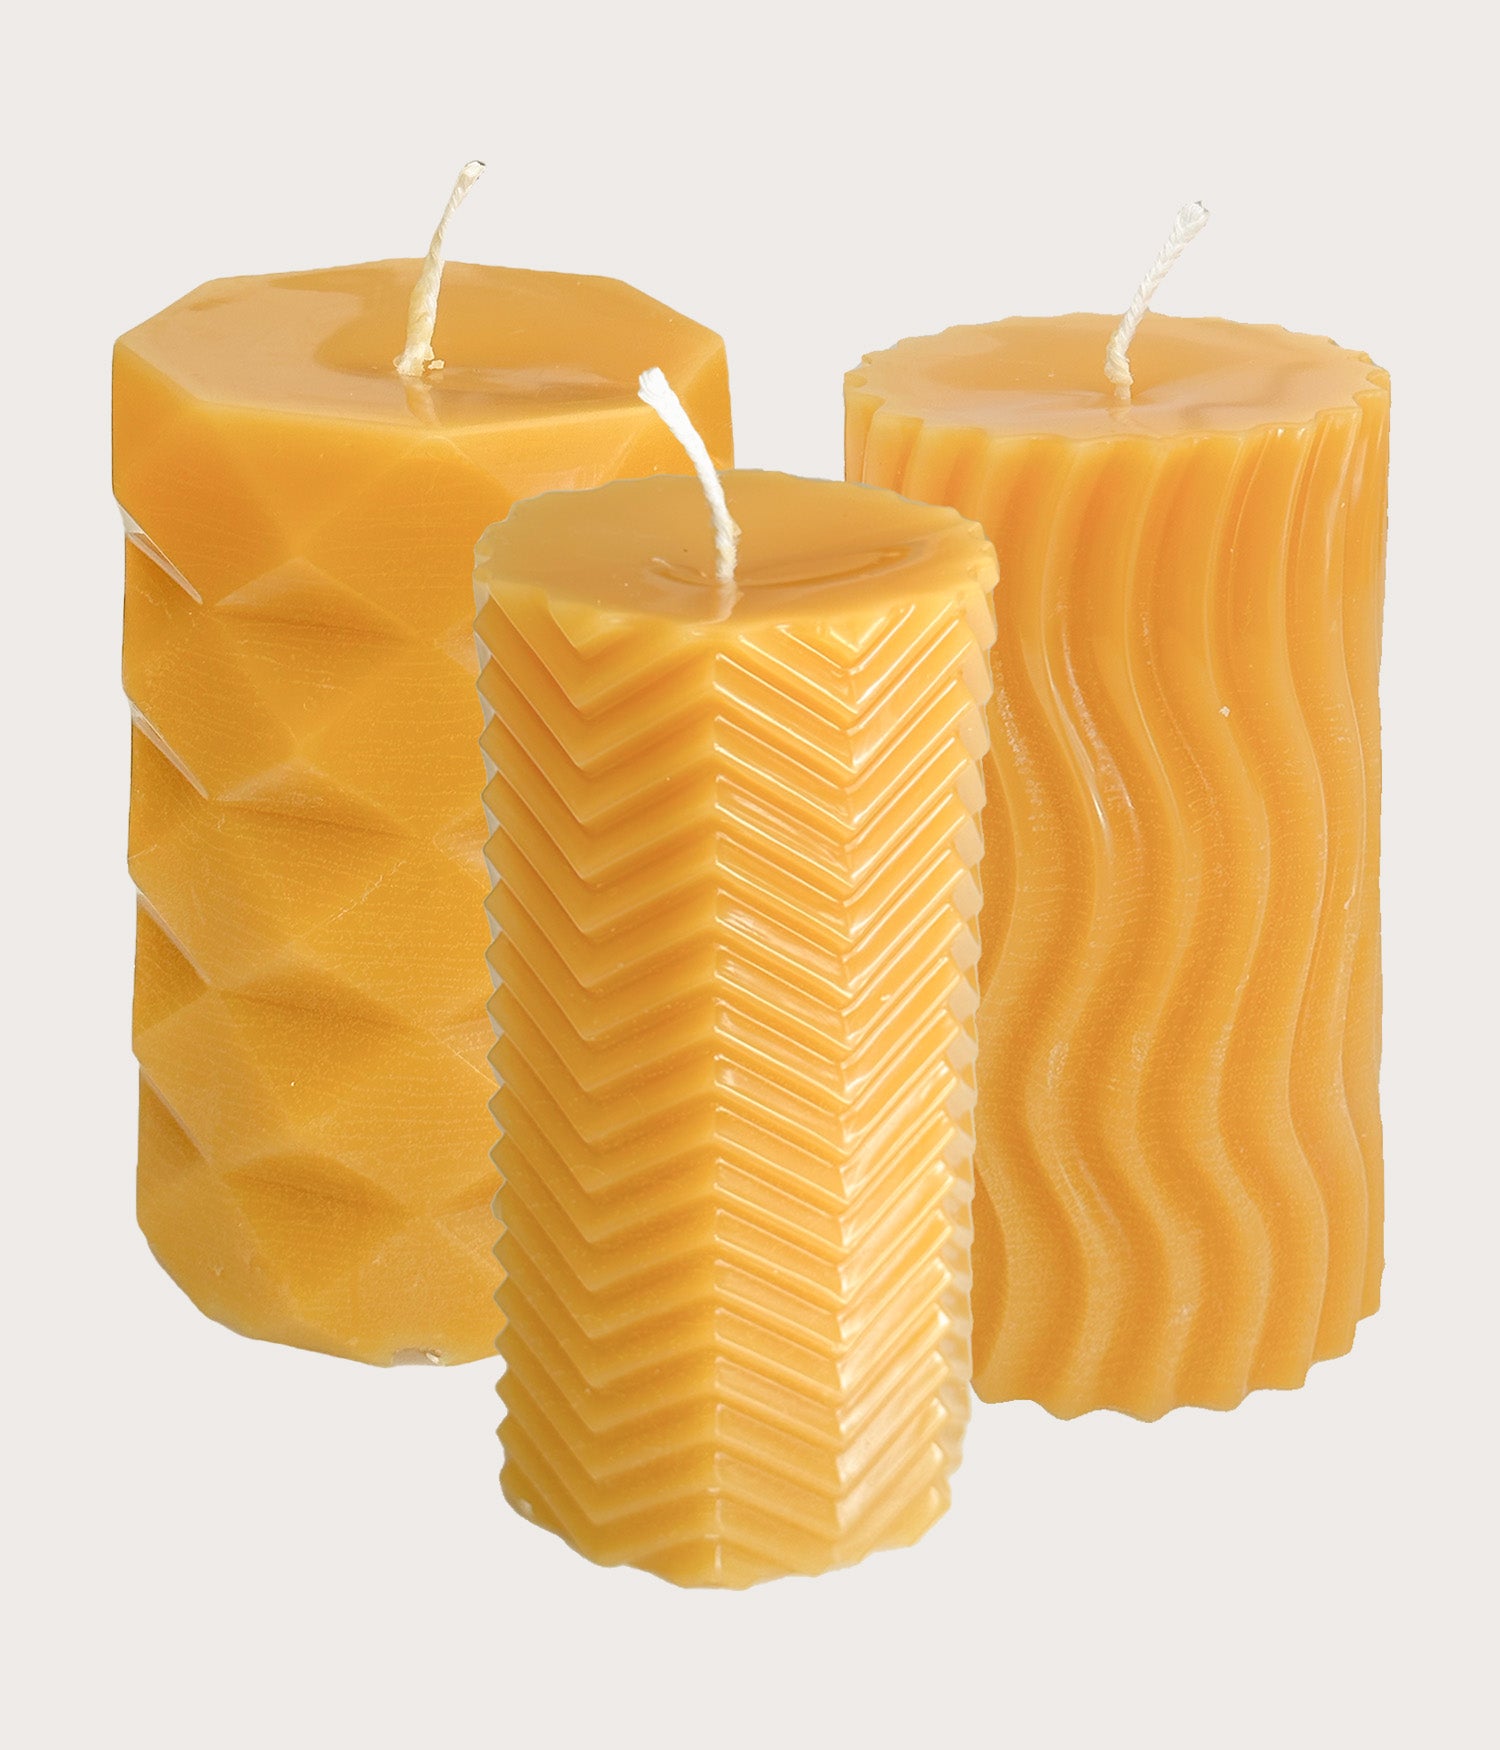 Beeswax Candles - The Big Package